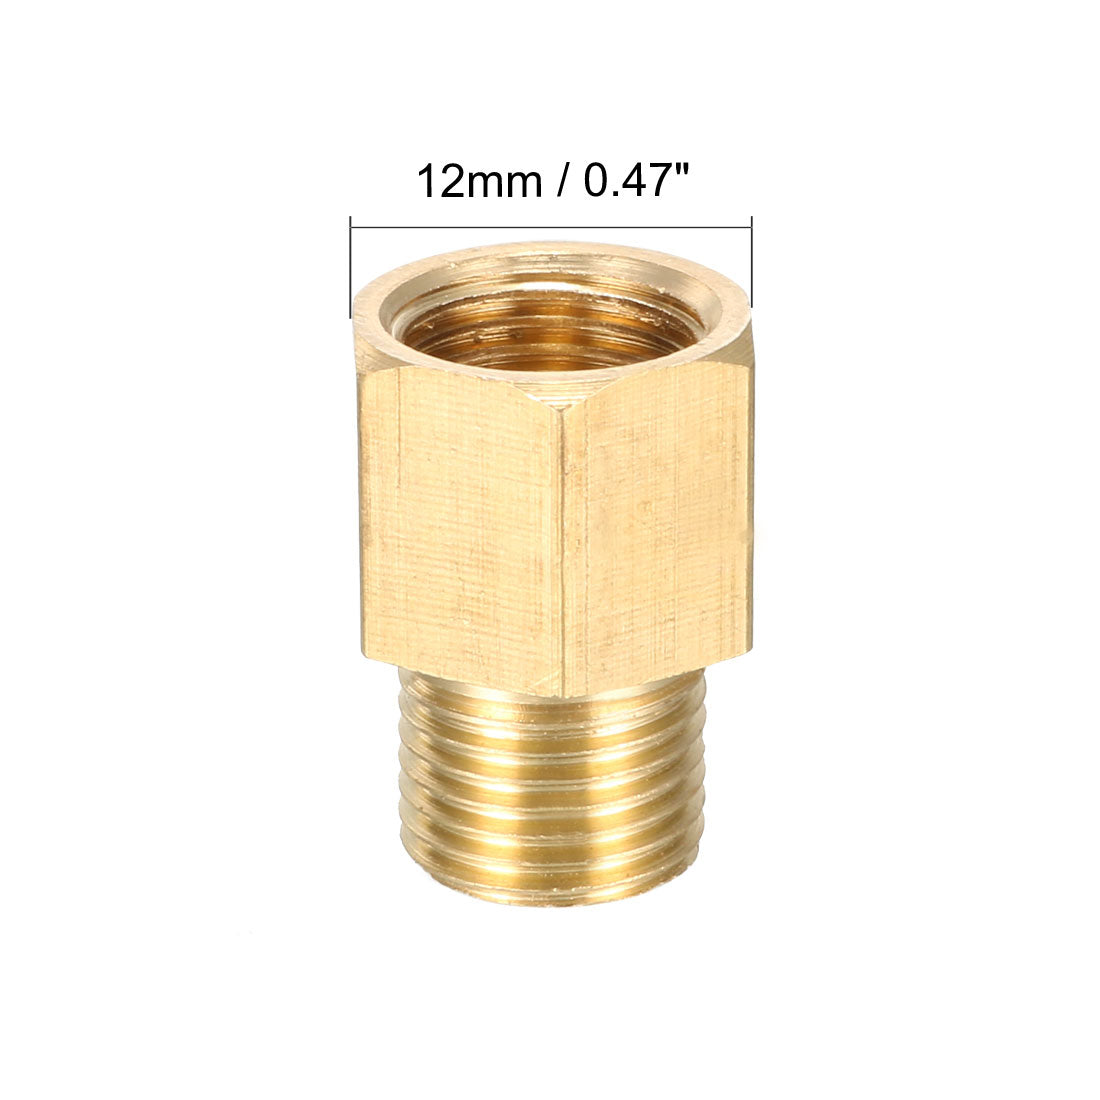 uxcell Uxcell Brass Threaded Pipe Fitting 1/8N PT Male x 1/8N PT Female Adapter 5pcs